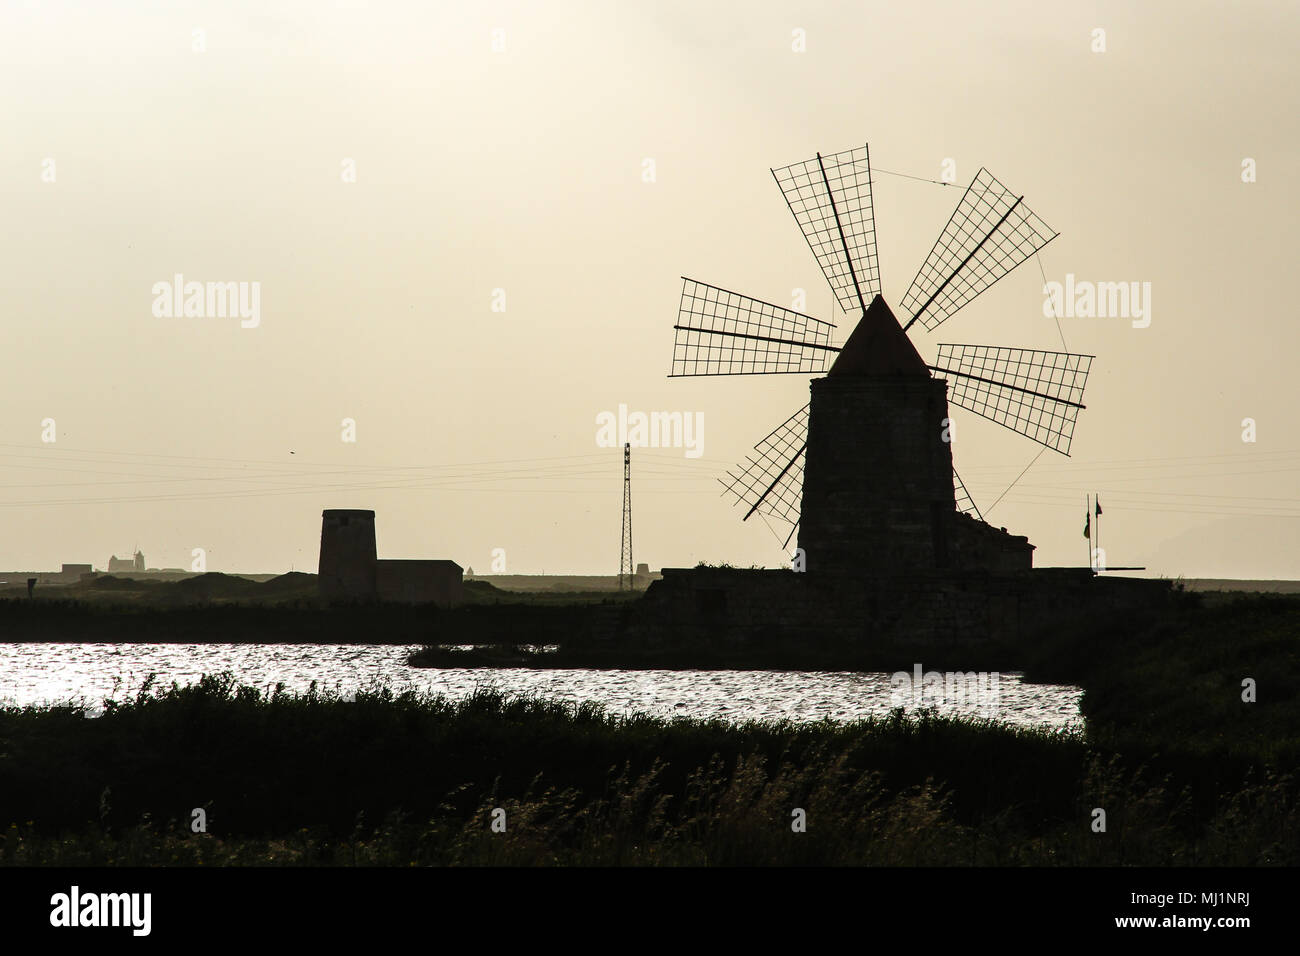 Silhouette of windmill used in salines during the sunset. Photo with high contrast due to backlit sunset situation emphasising the shape of the tradit Stock Photo